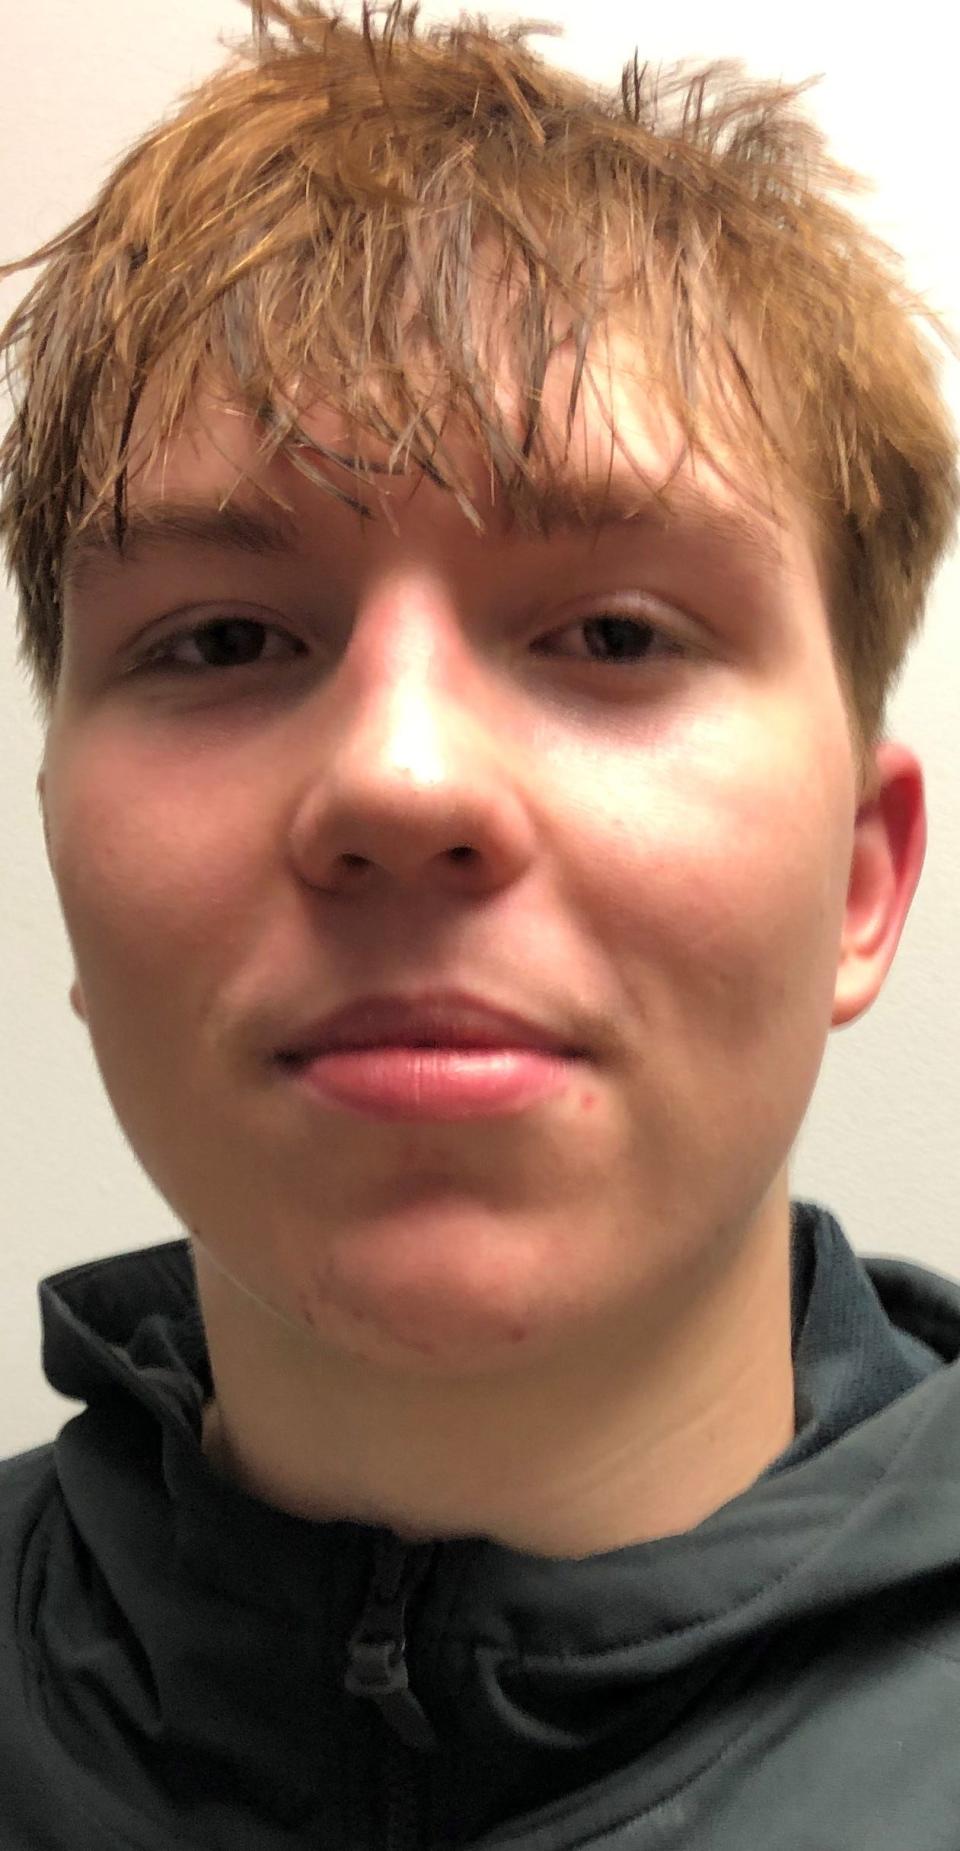 Newark senior Steele Meister scored 16 points and had three assists Friday, but no other Wildcat was close to double figures in a 55-43 loss at Reynoldsburg.